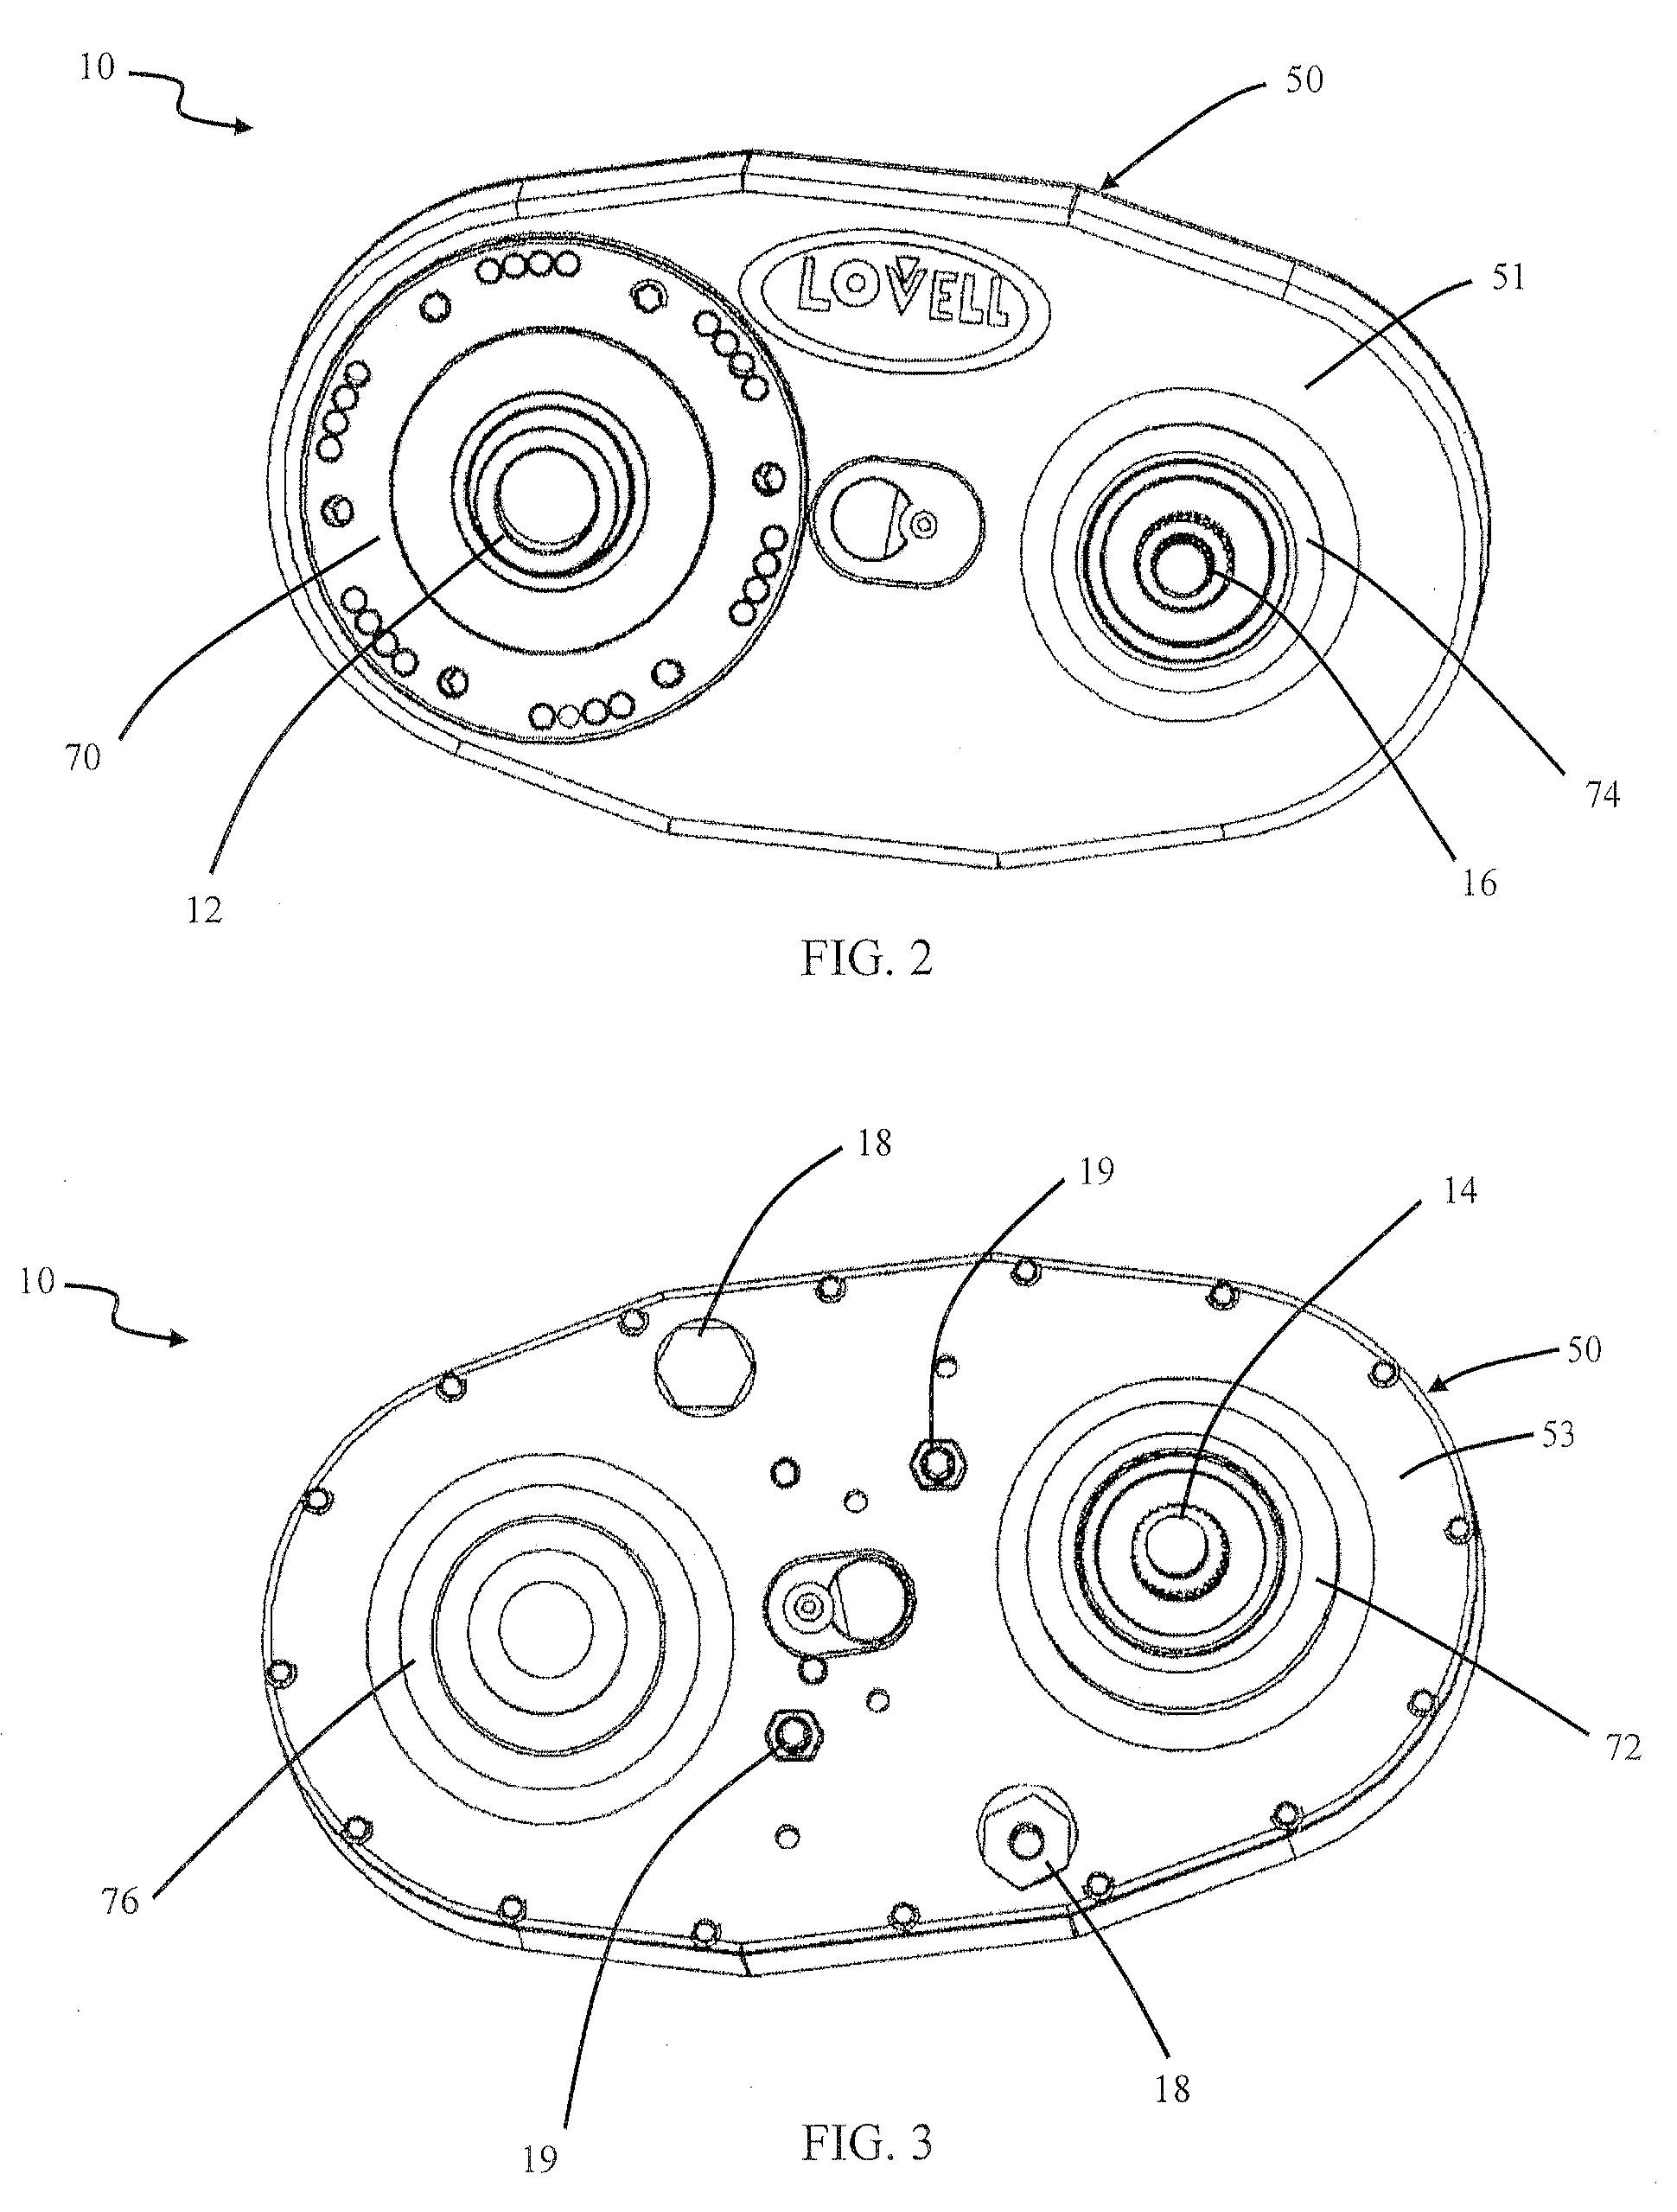 Transfer case with low gear ratio